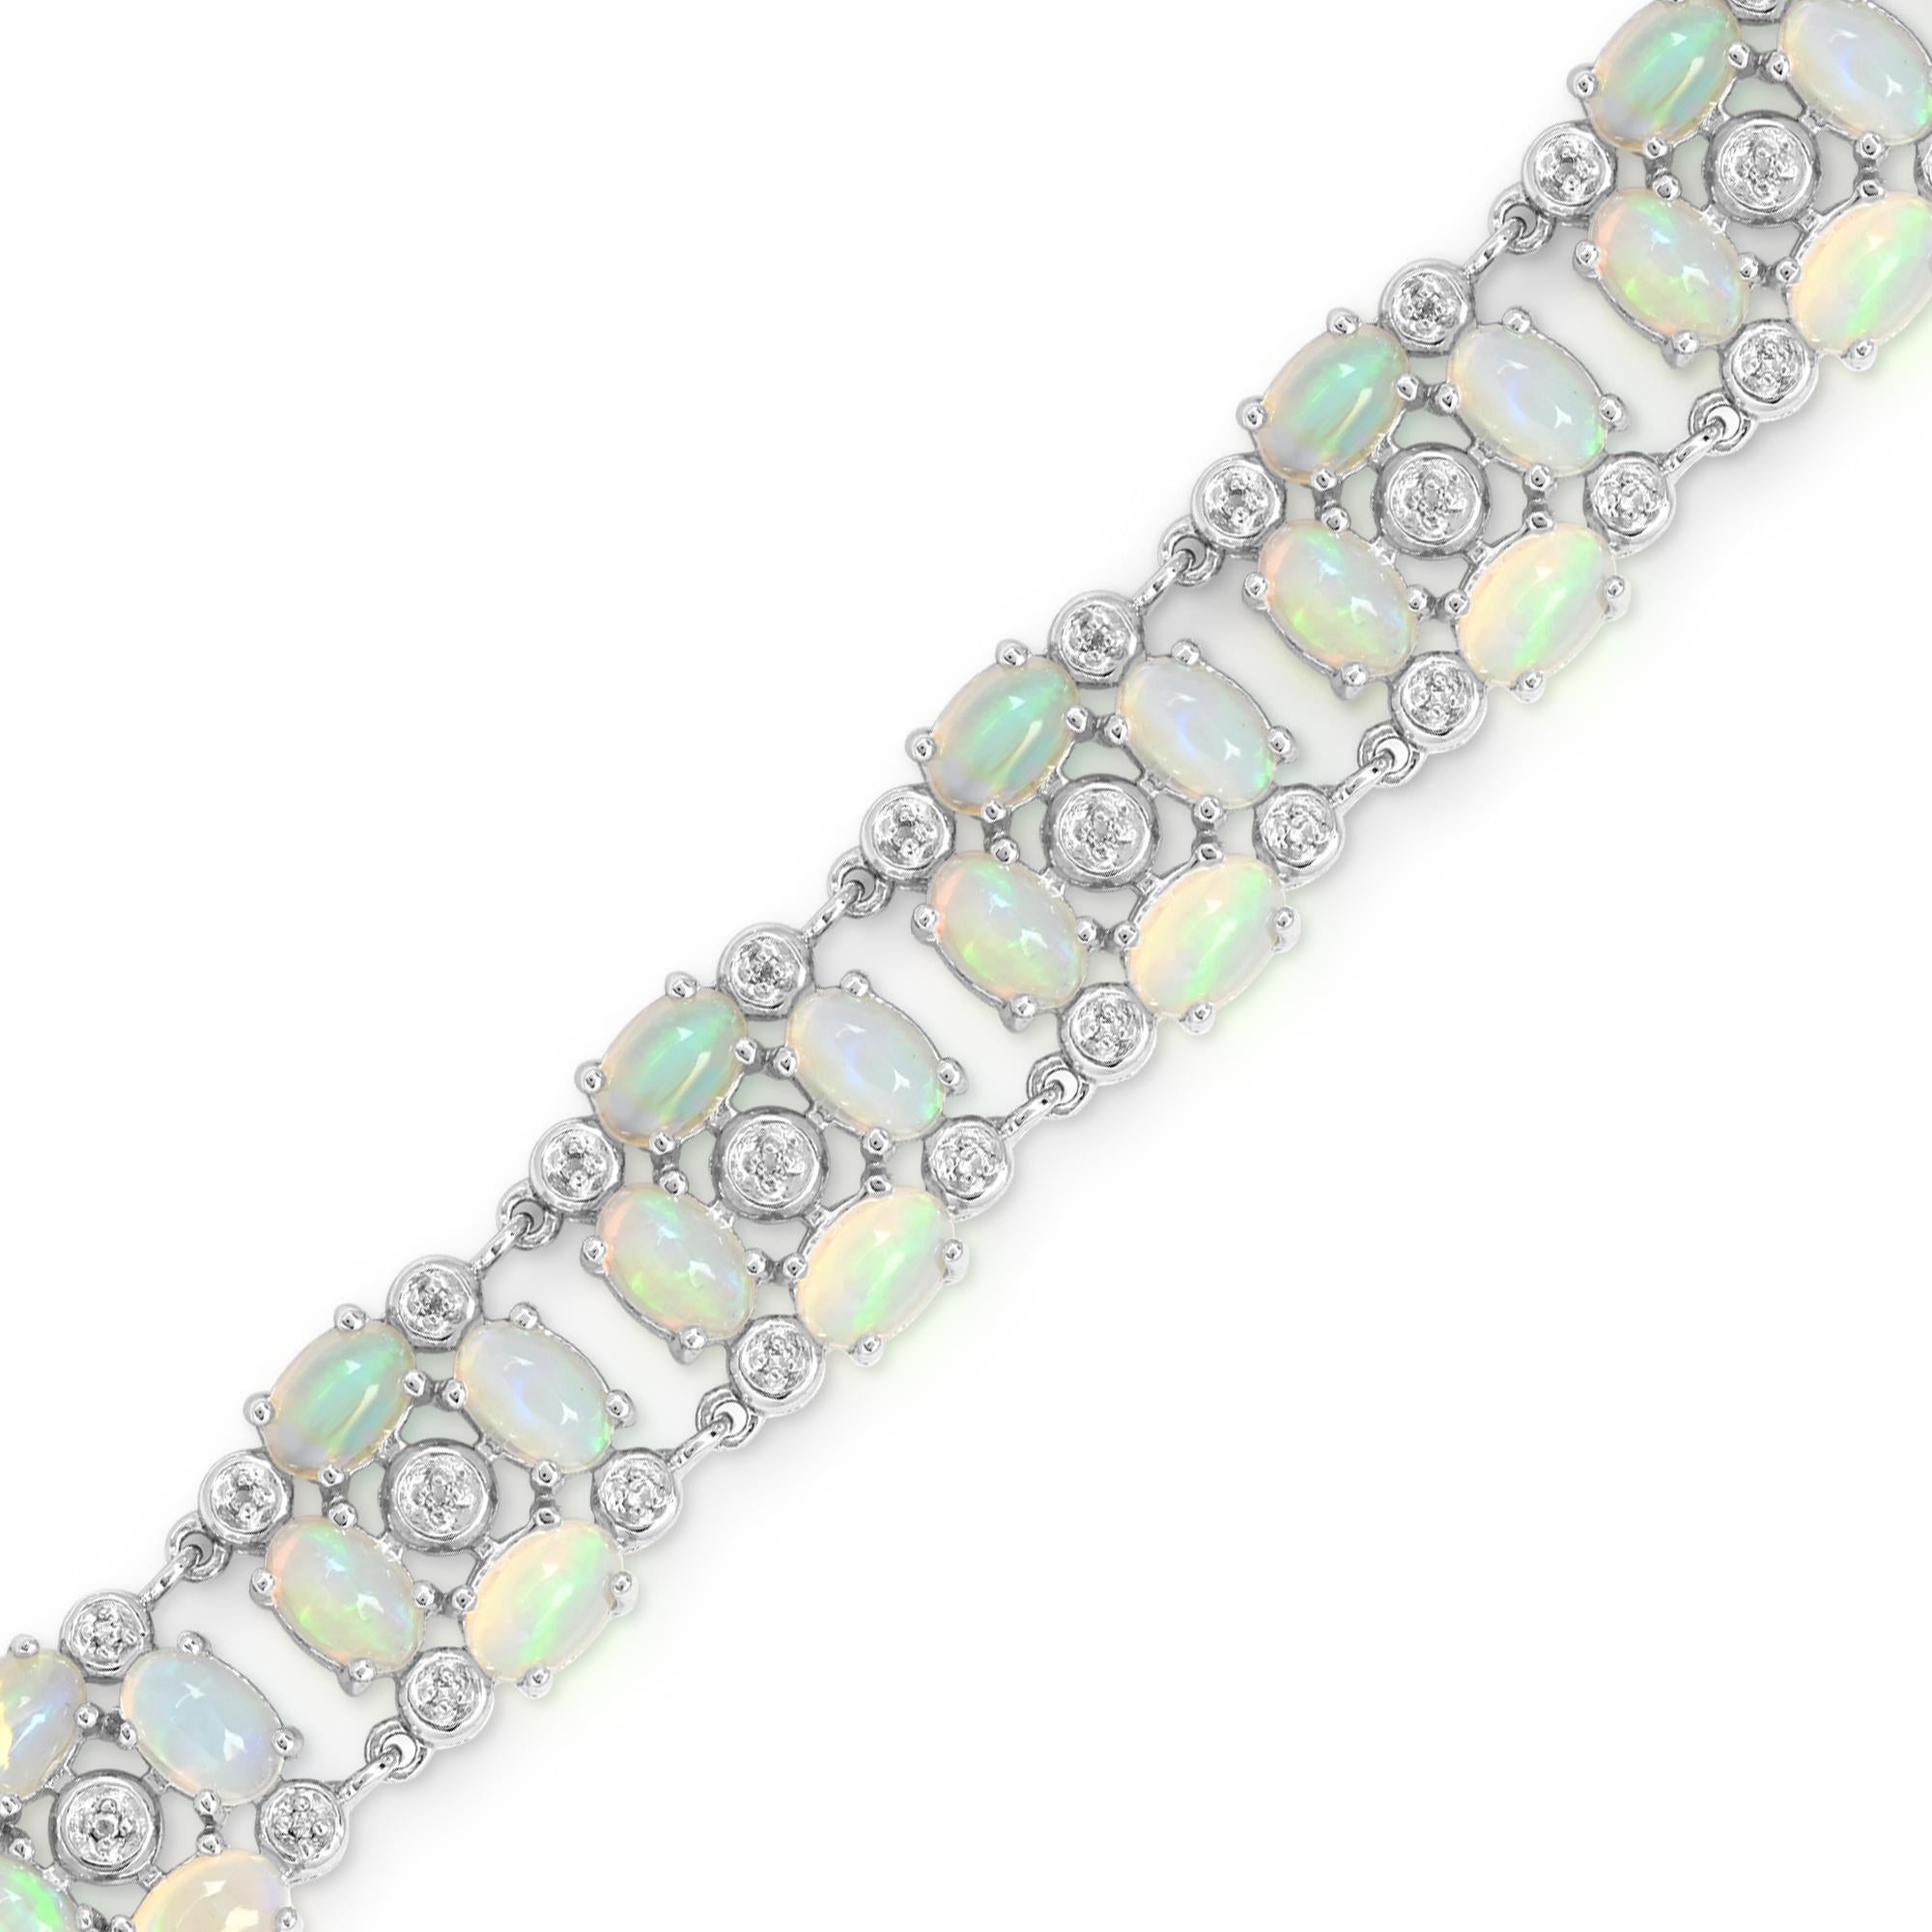 This charming bracelet features 48 stunning oval-cut opal accented by 50 pieces of sparkling round white topaz gemstones, set in a sleek sterling silver design. The hidden open-box closure adds a touch of elegance, making this bracelet both stylish